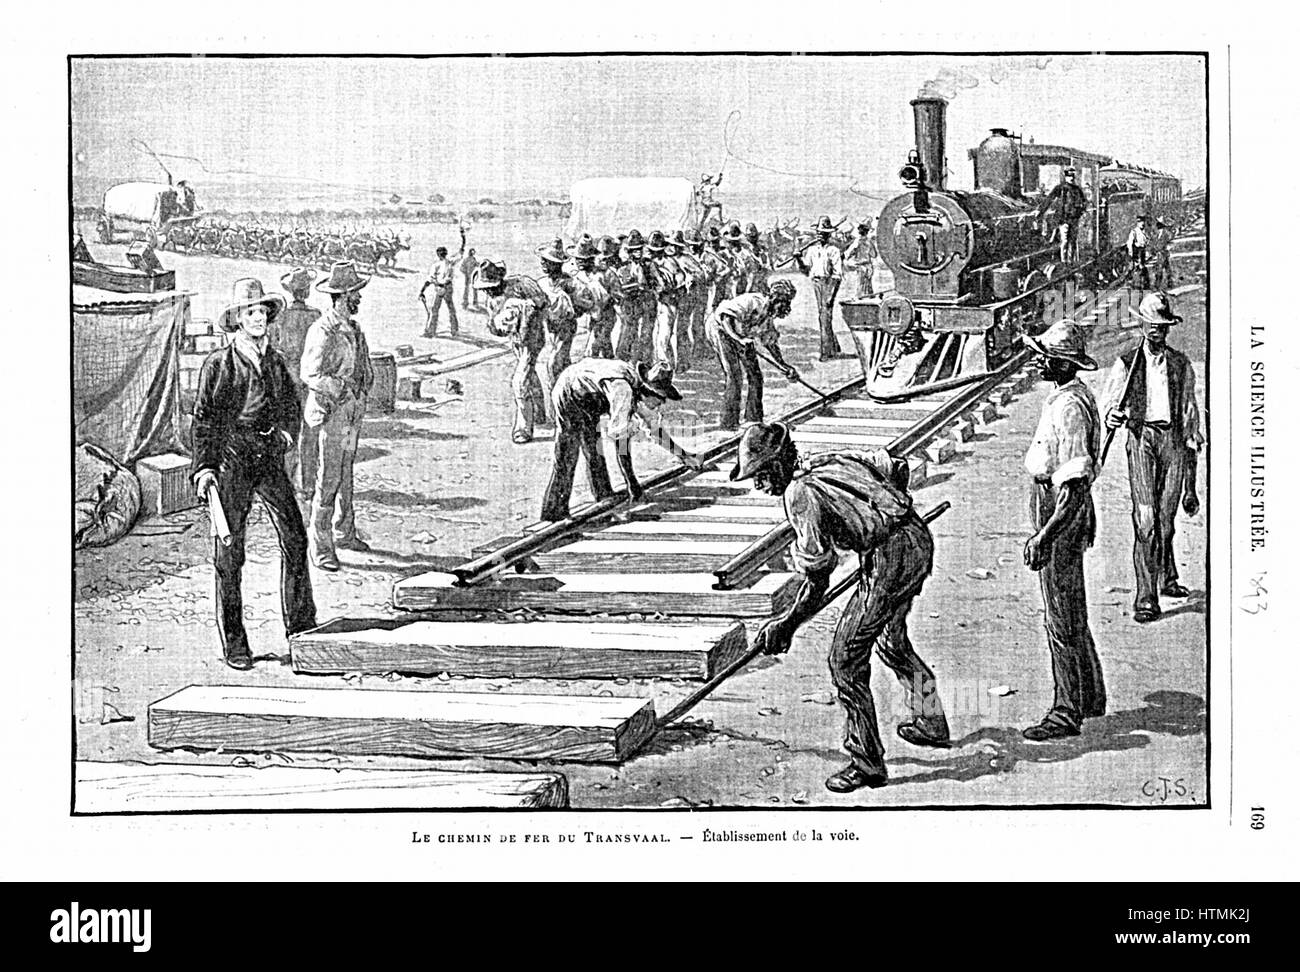 Laying sleepers and rails (permanent way) on the Transvaal Railway, Africa. Illustration published Paris 1893 Stock Photo